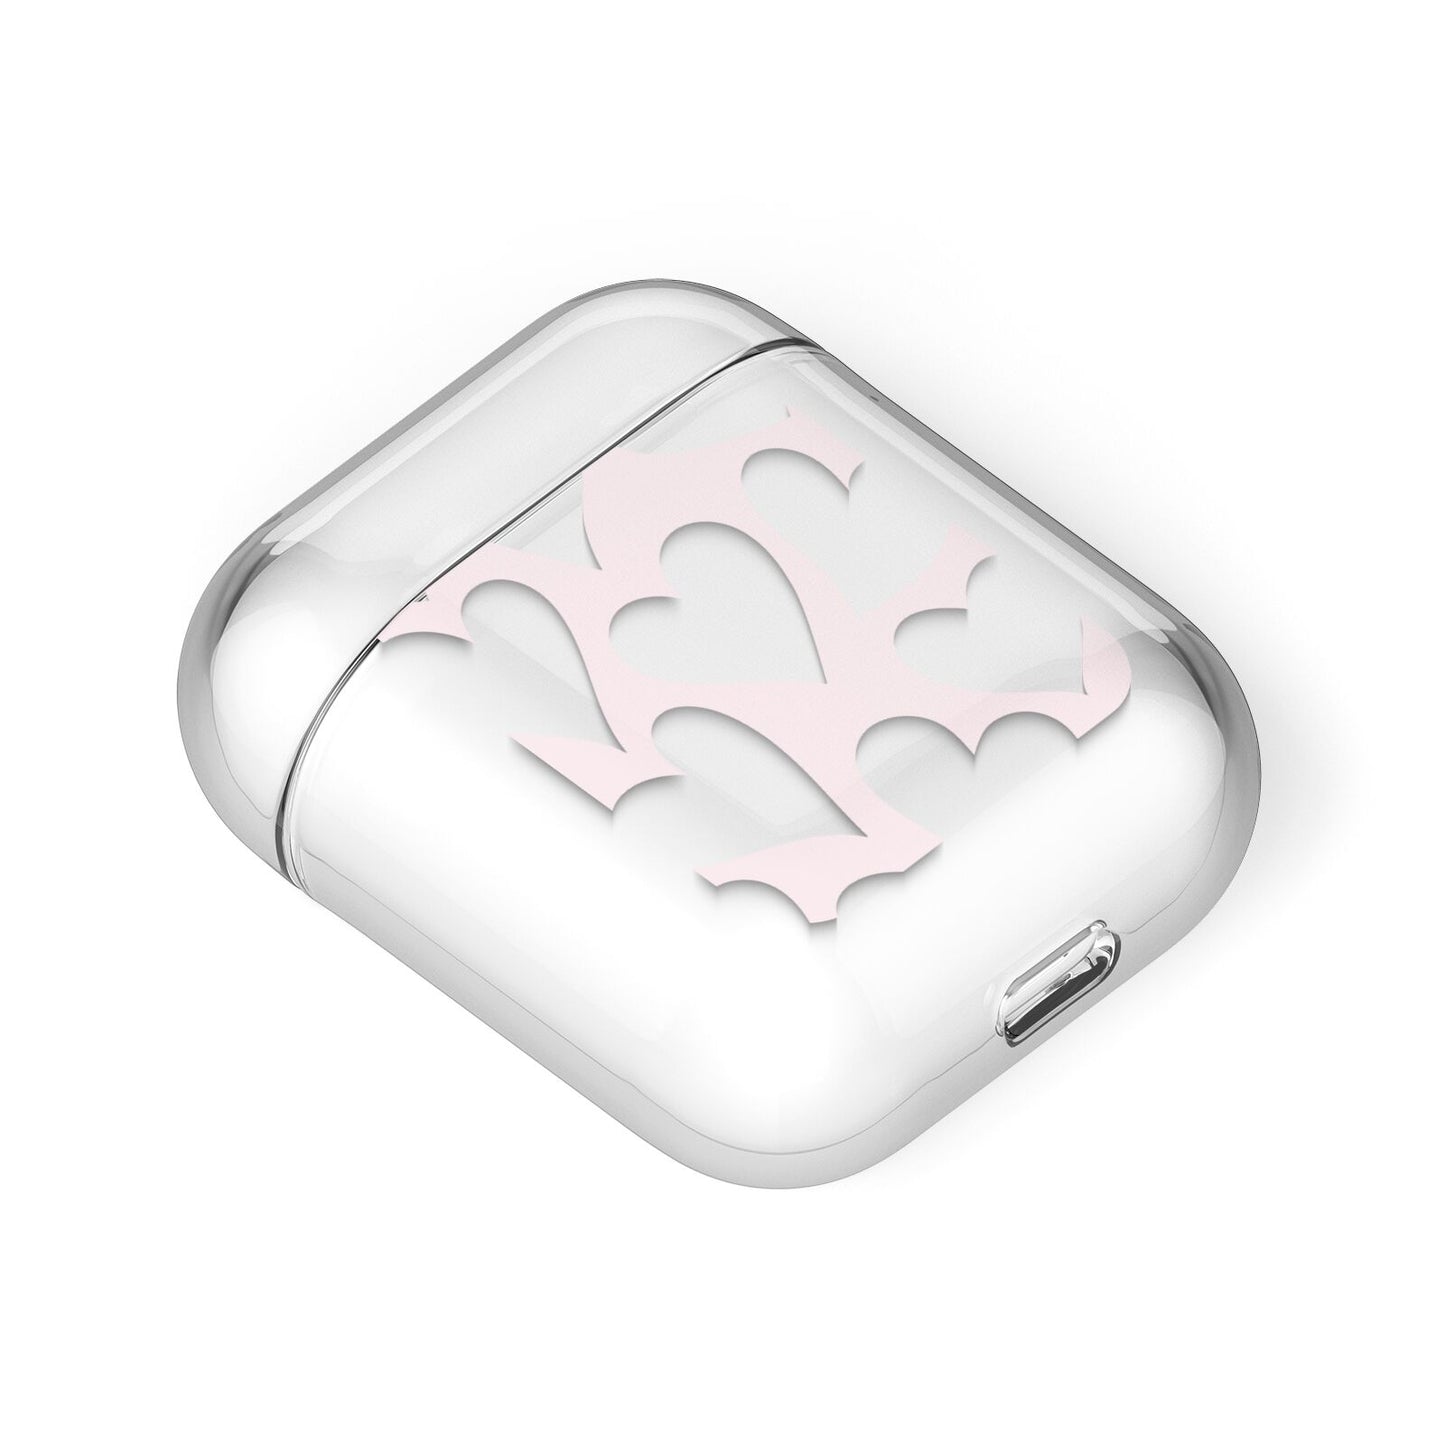 Heart AirPods Case Laid Flat